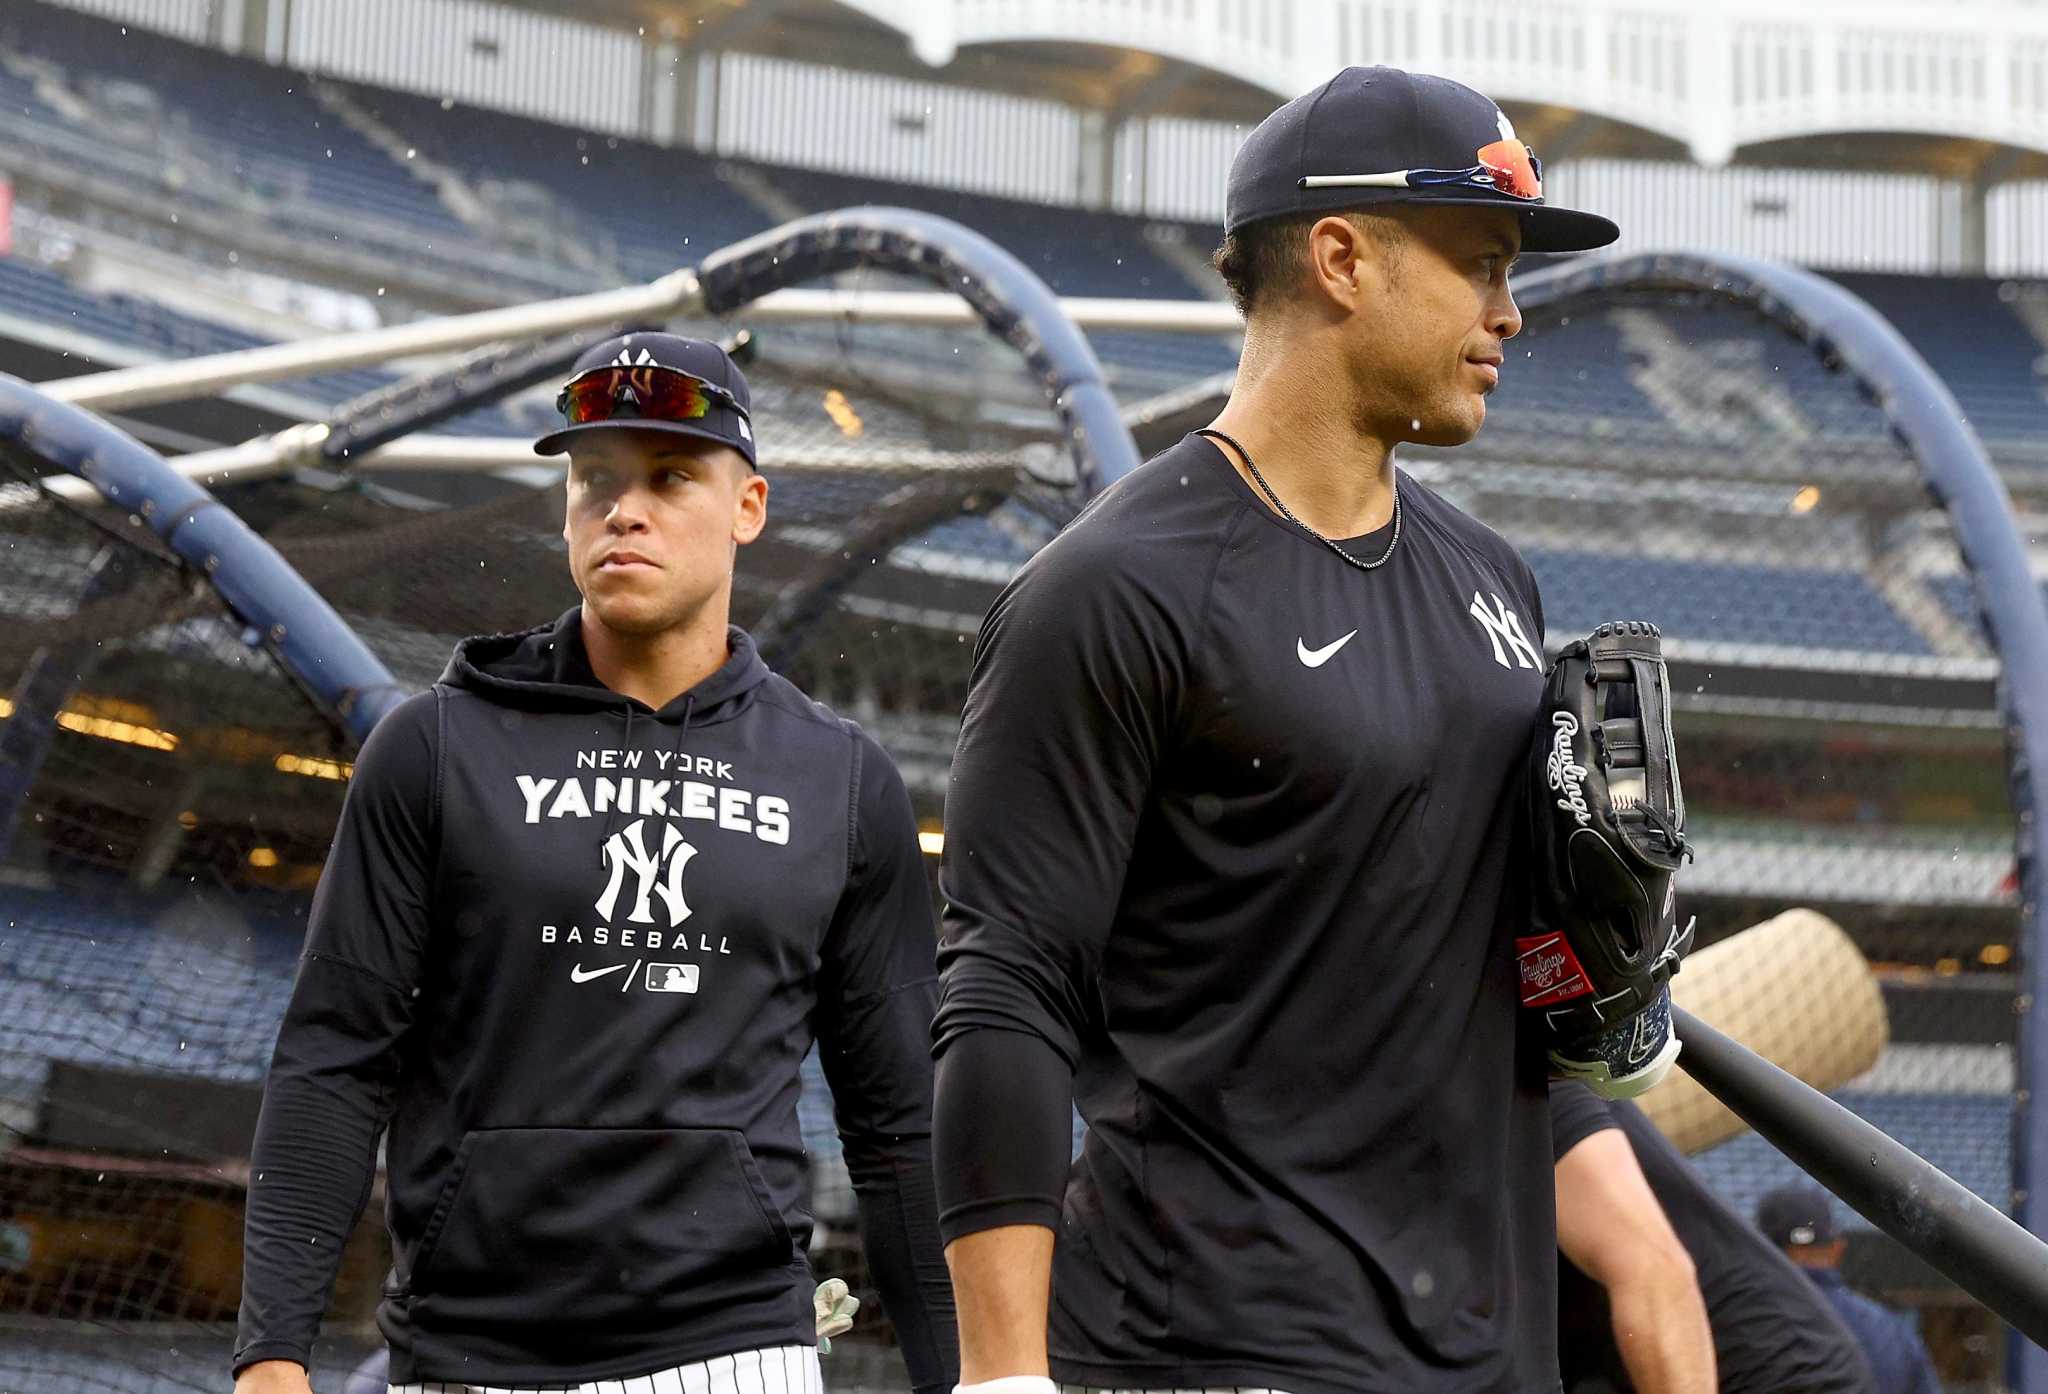 Could Stanton and Judge be the next Mantle and Maris?